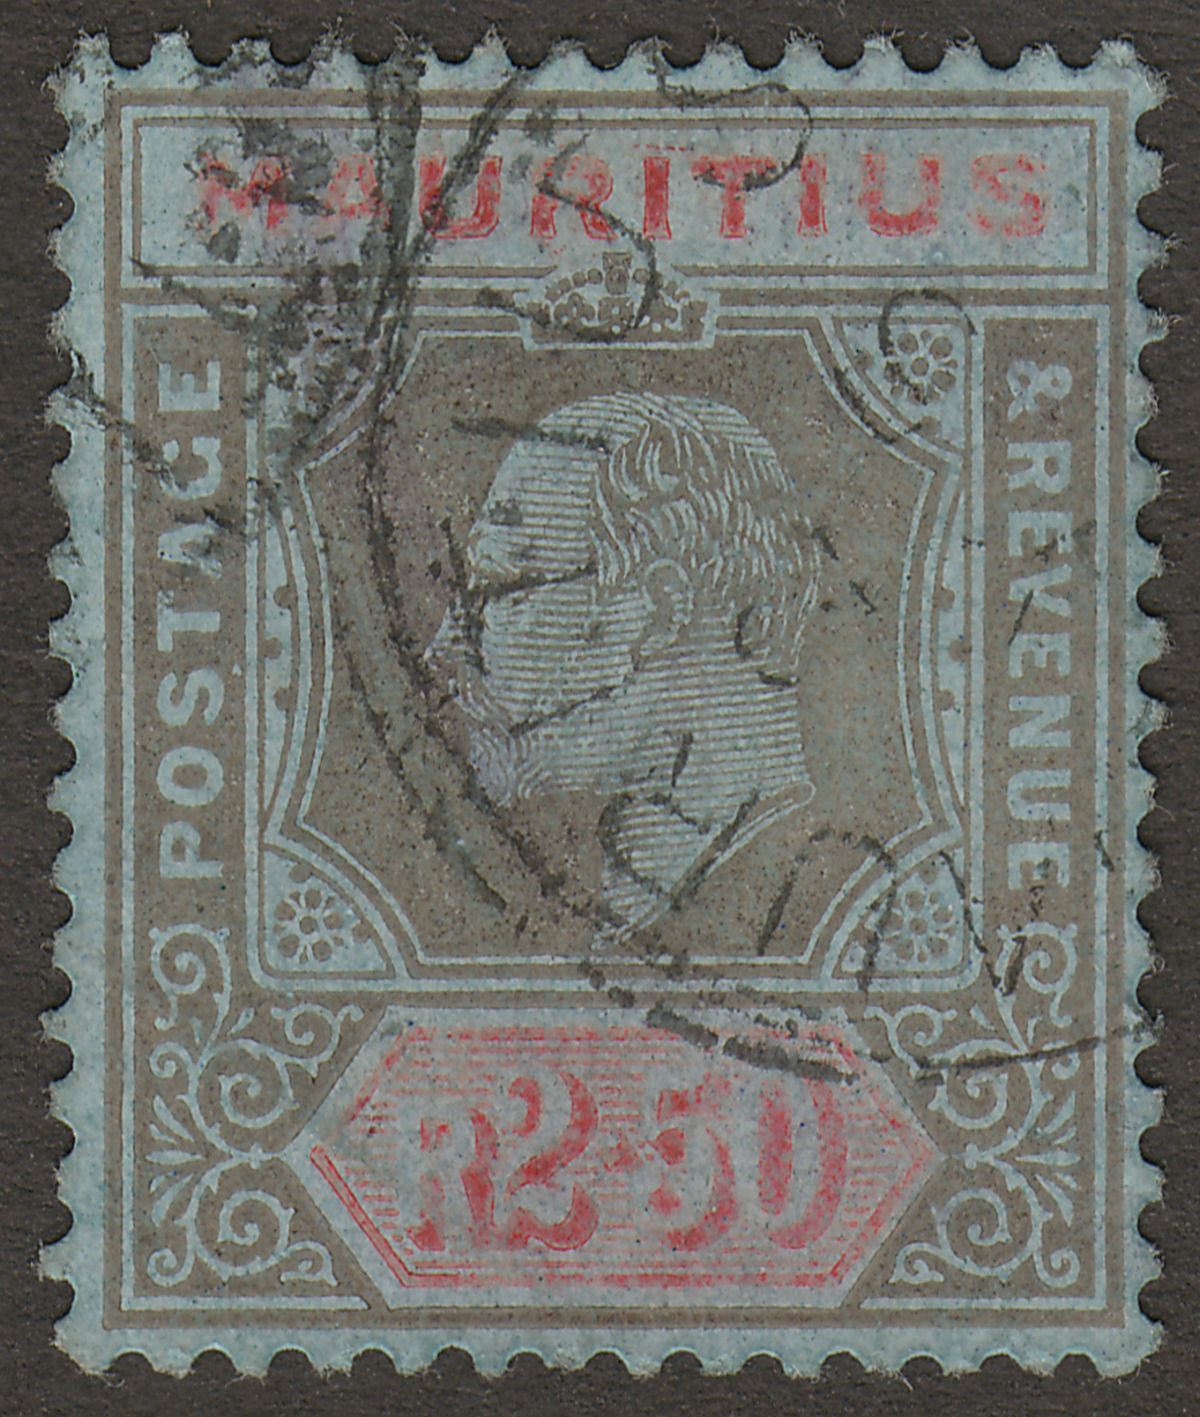 Mauritius 1910 KEVII 2r50c Black and Red on Blue Used SG193 cat £75 faults